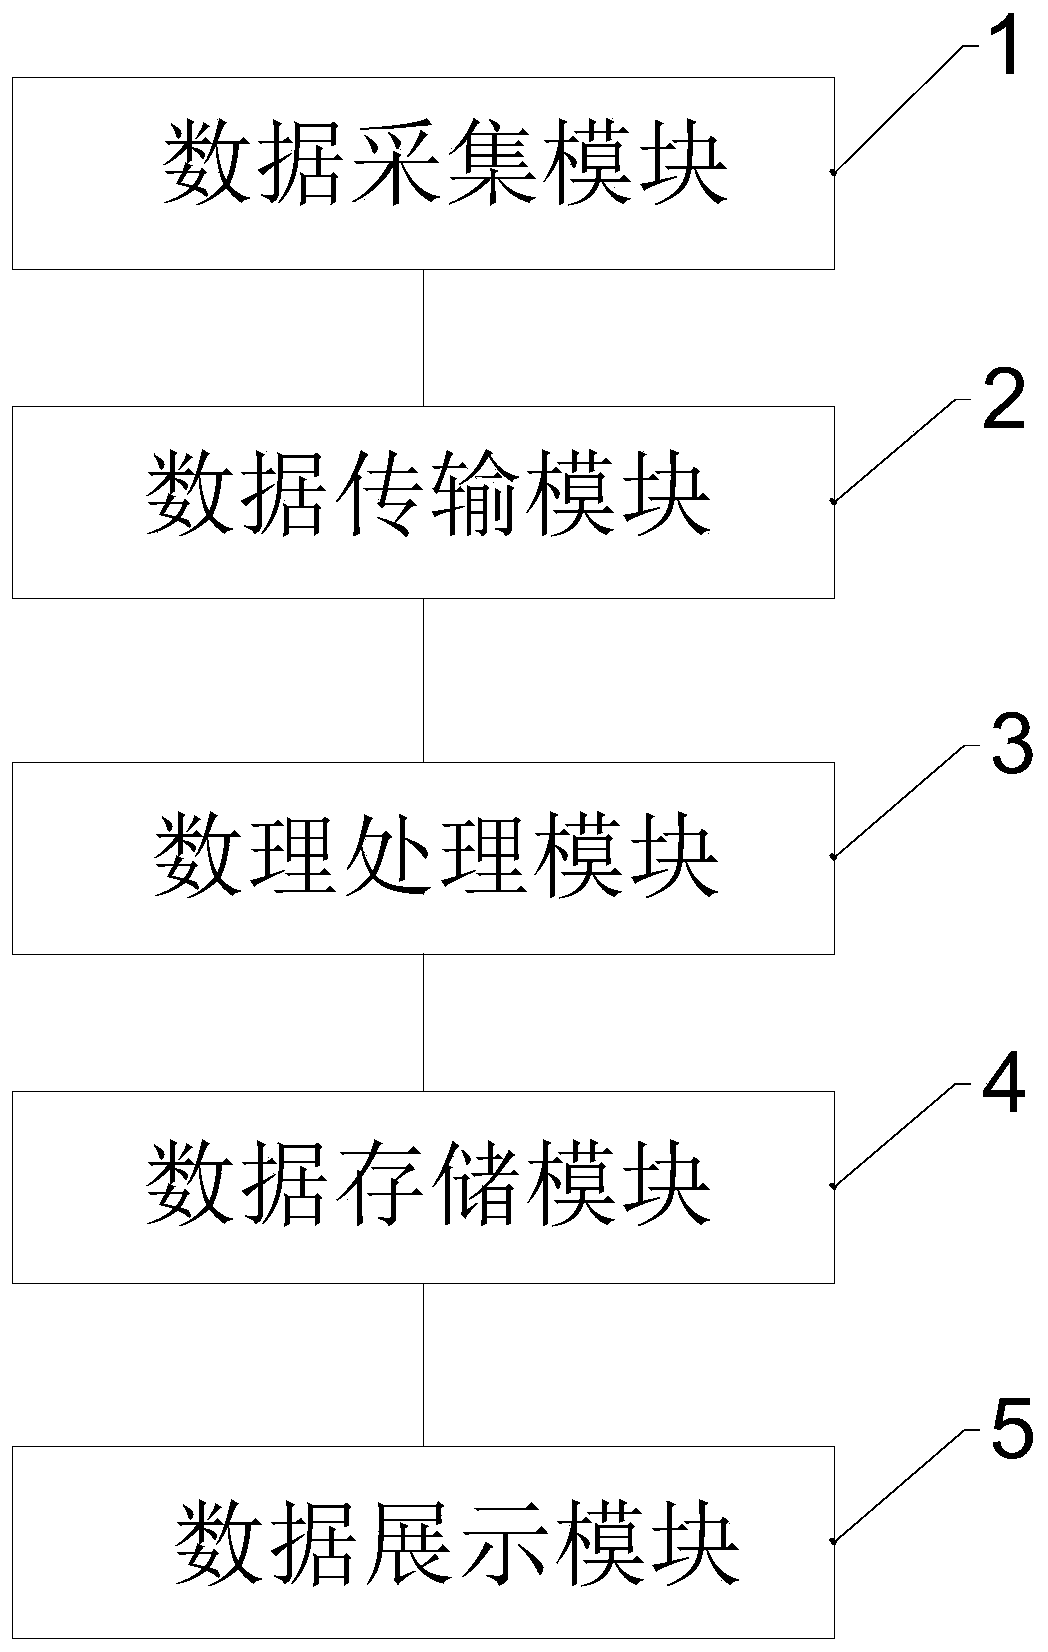 Terminal information processing and displaying method and system